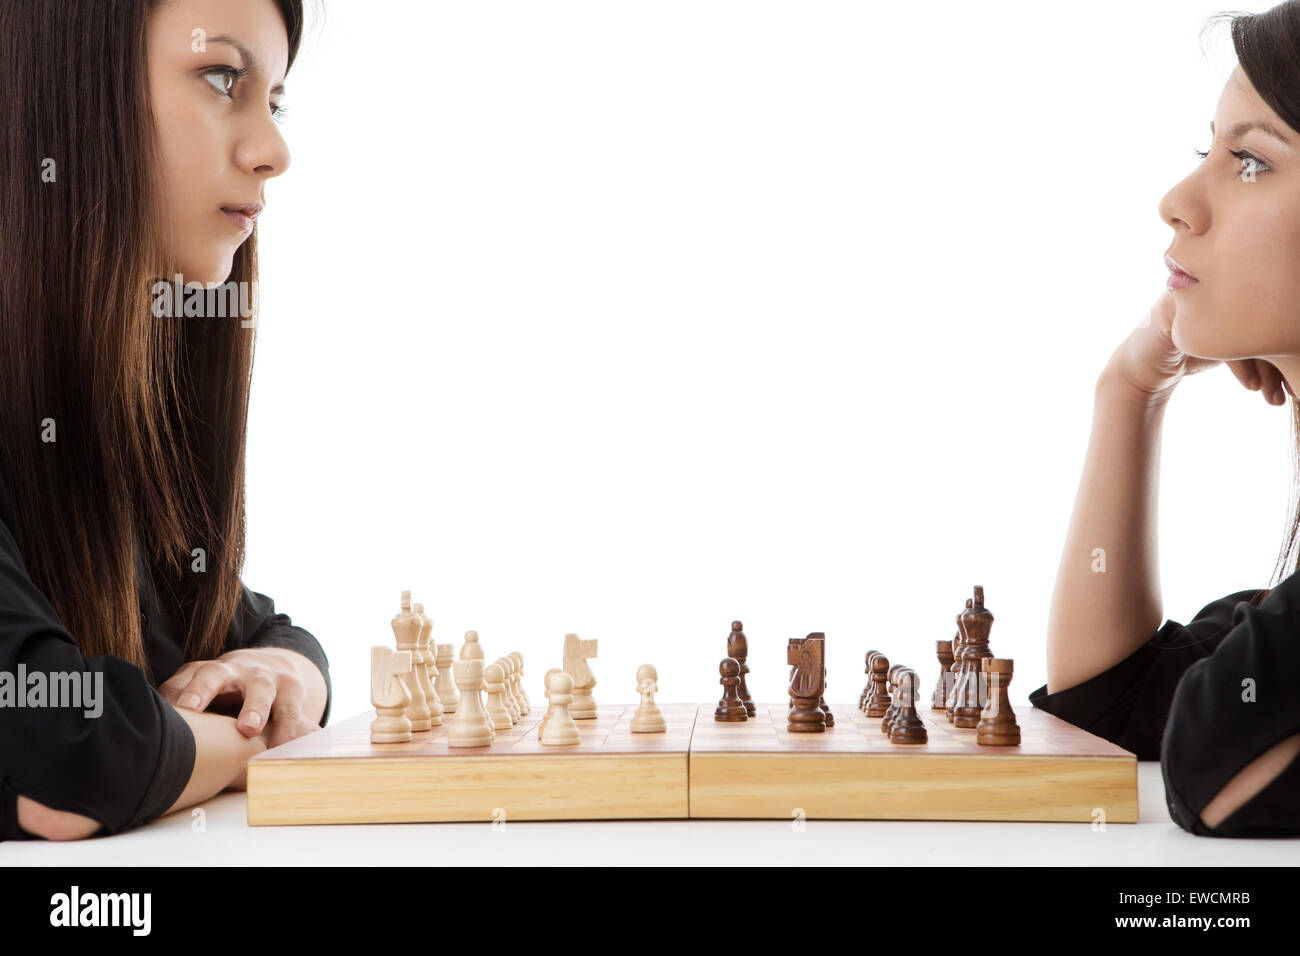 young woman playing chess against herself shot in the studio Stock Photo